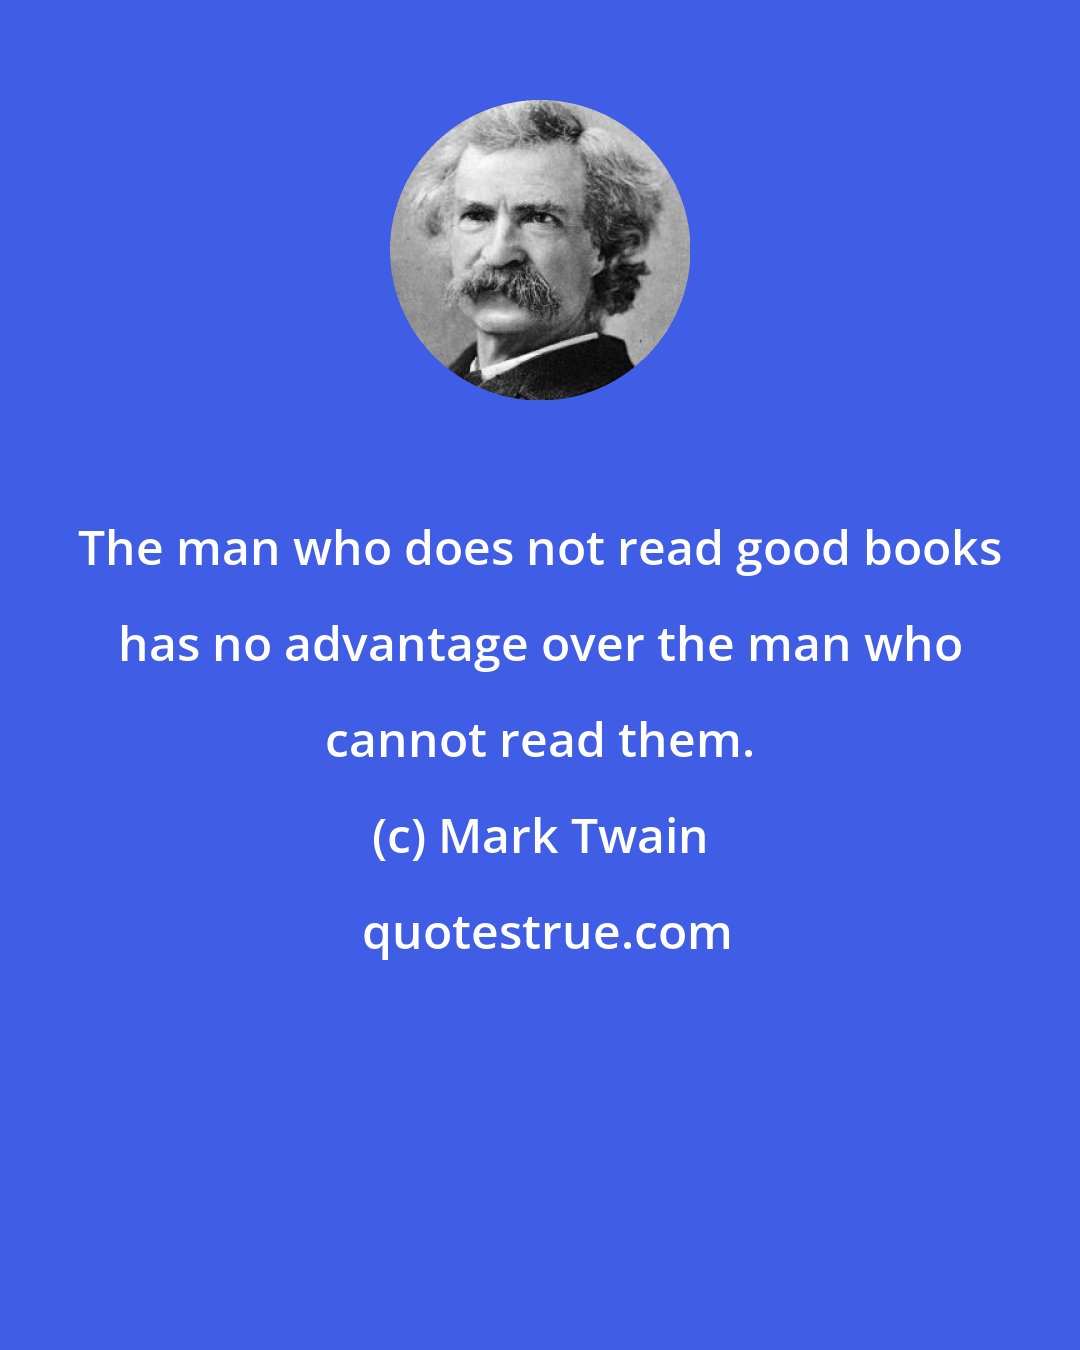 Mark Twain: The man who does not read good books has no advantage over the man who cannot read them.